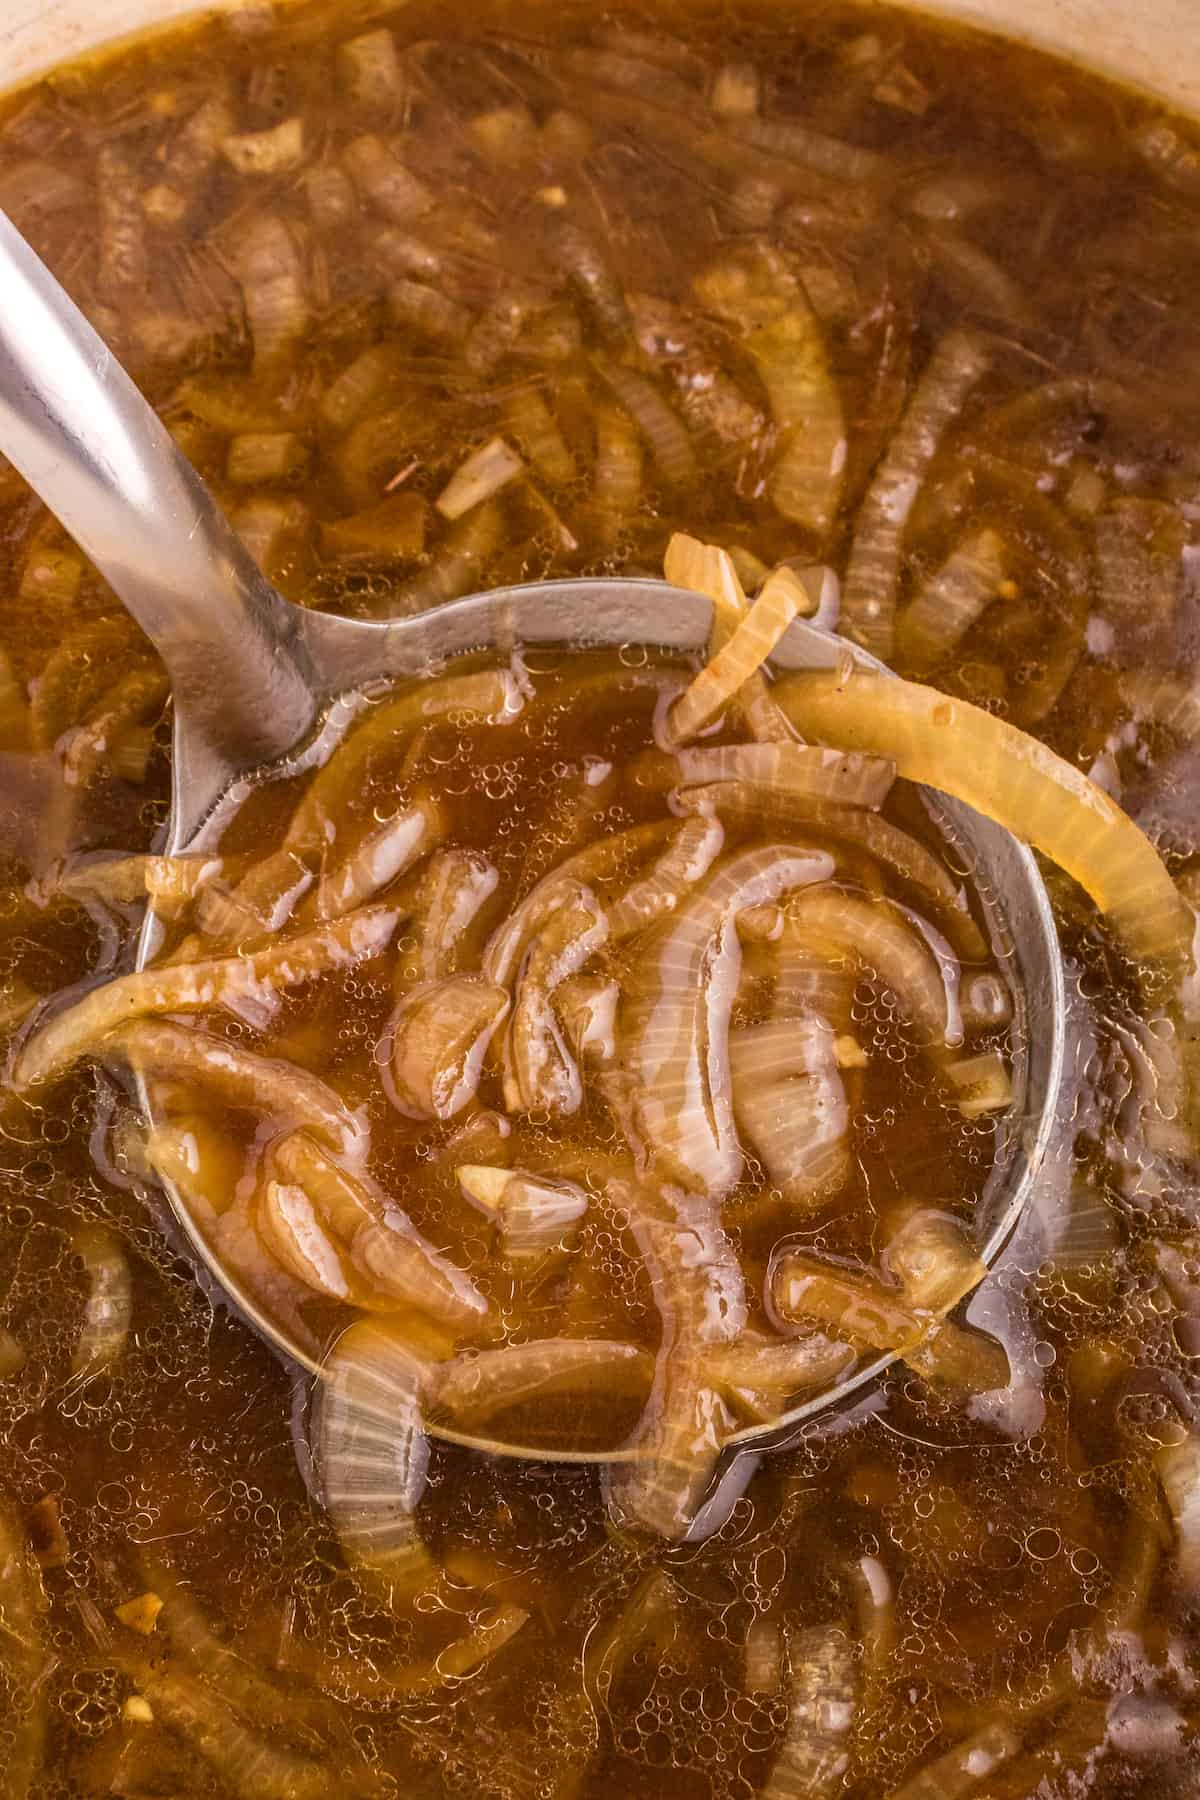 Modified Description: An easy french onion soup recipe with a spoon full of onion soup in a pot.